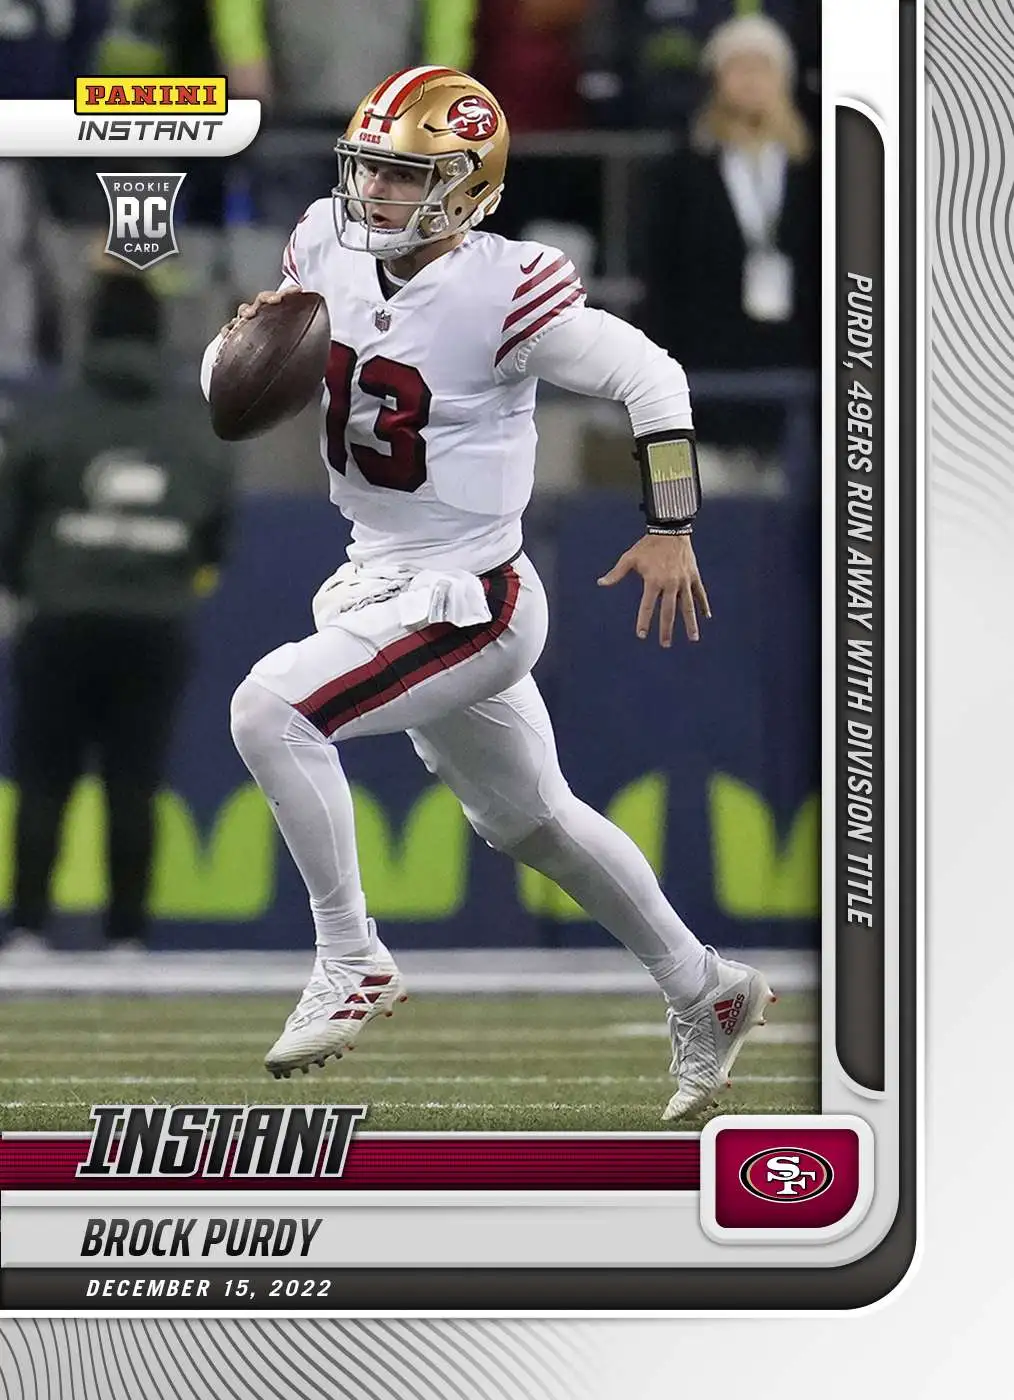 NFL San Francisco 49ers 2022 Instant Weekly Football 1 of 1579 Brock Purdy  #148 [Rookie Card, 49ers Run Away with Division Title]